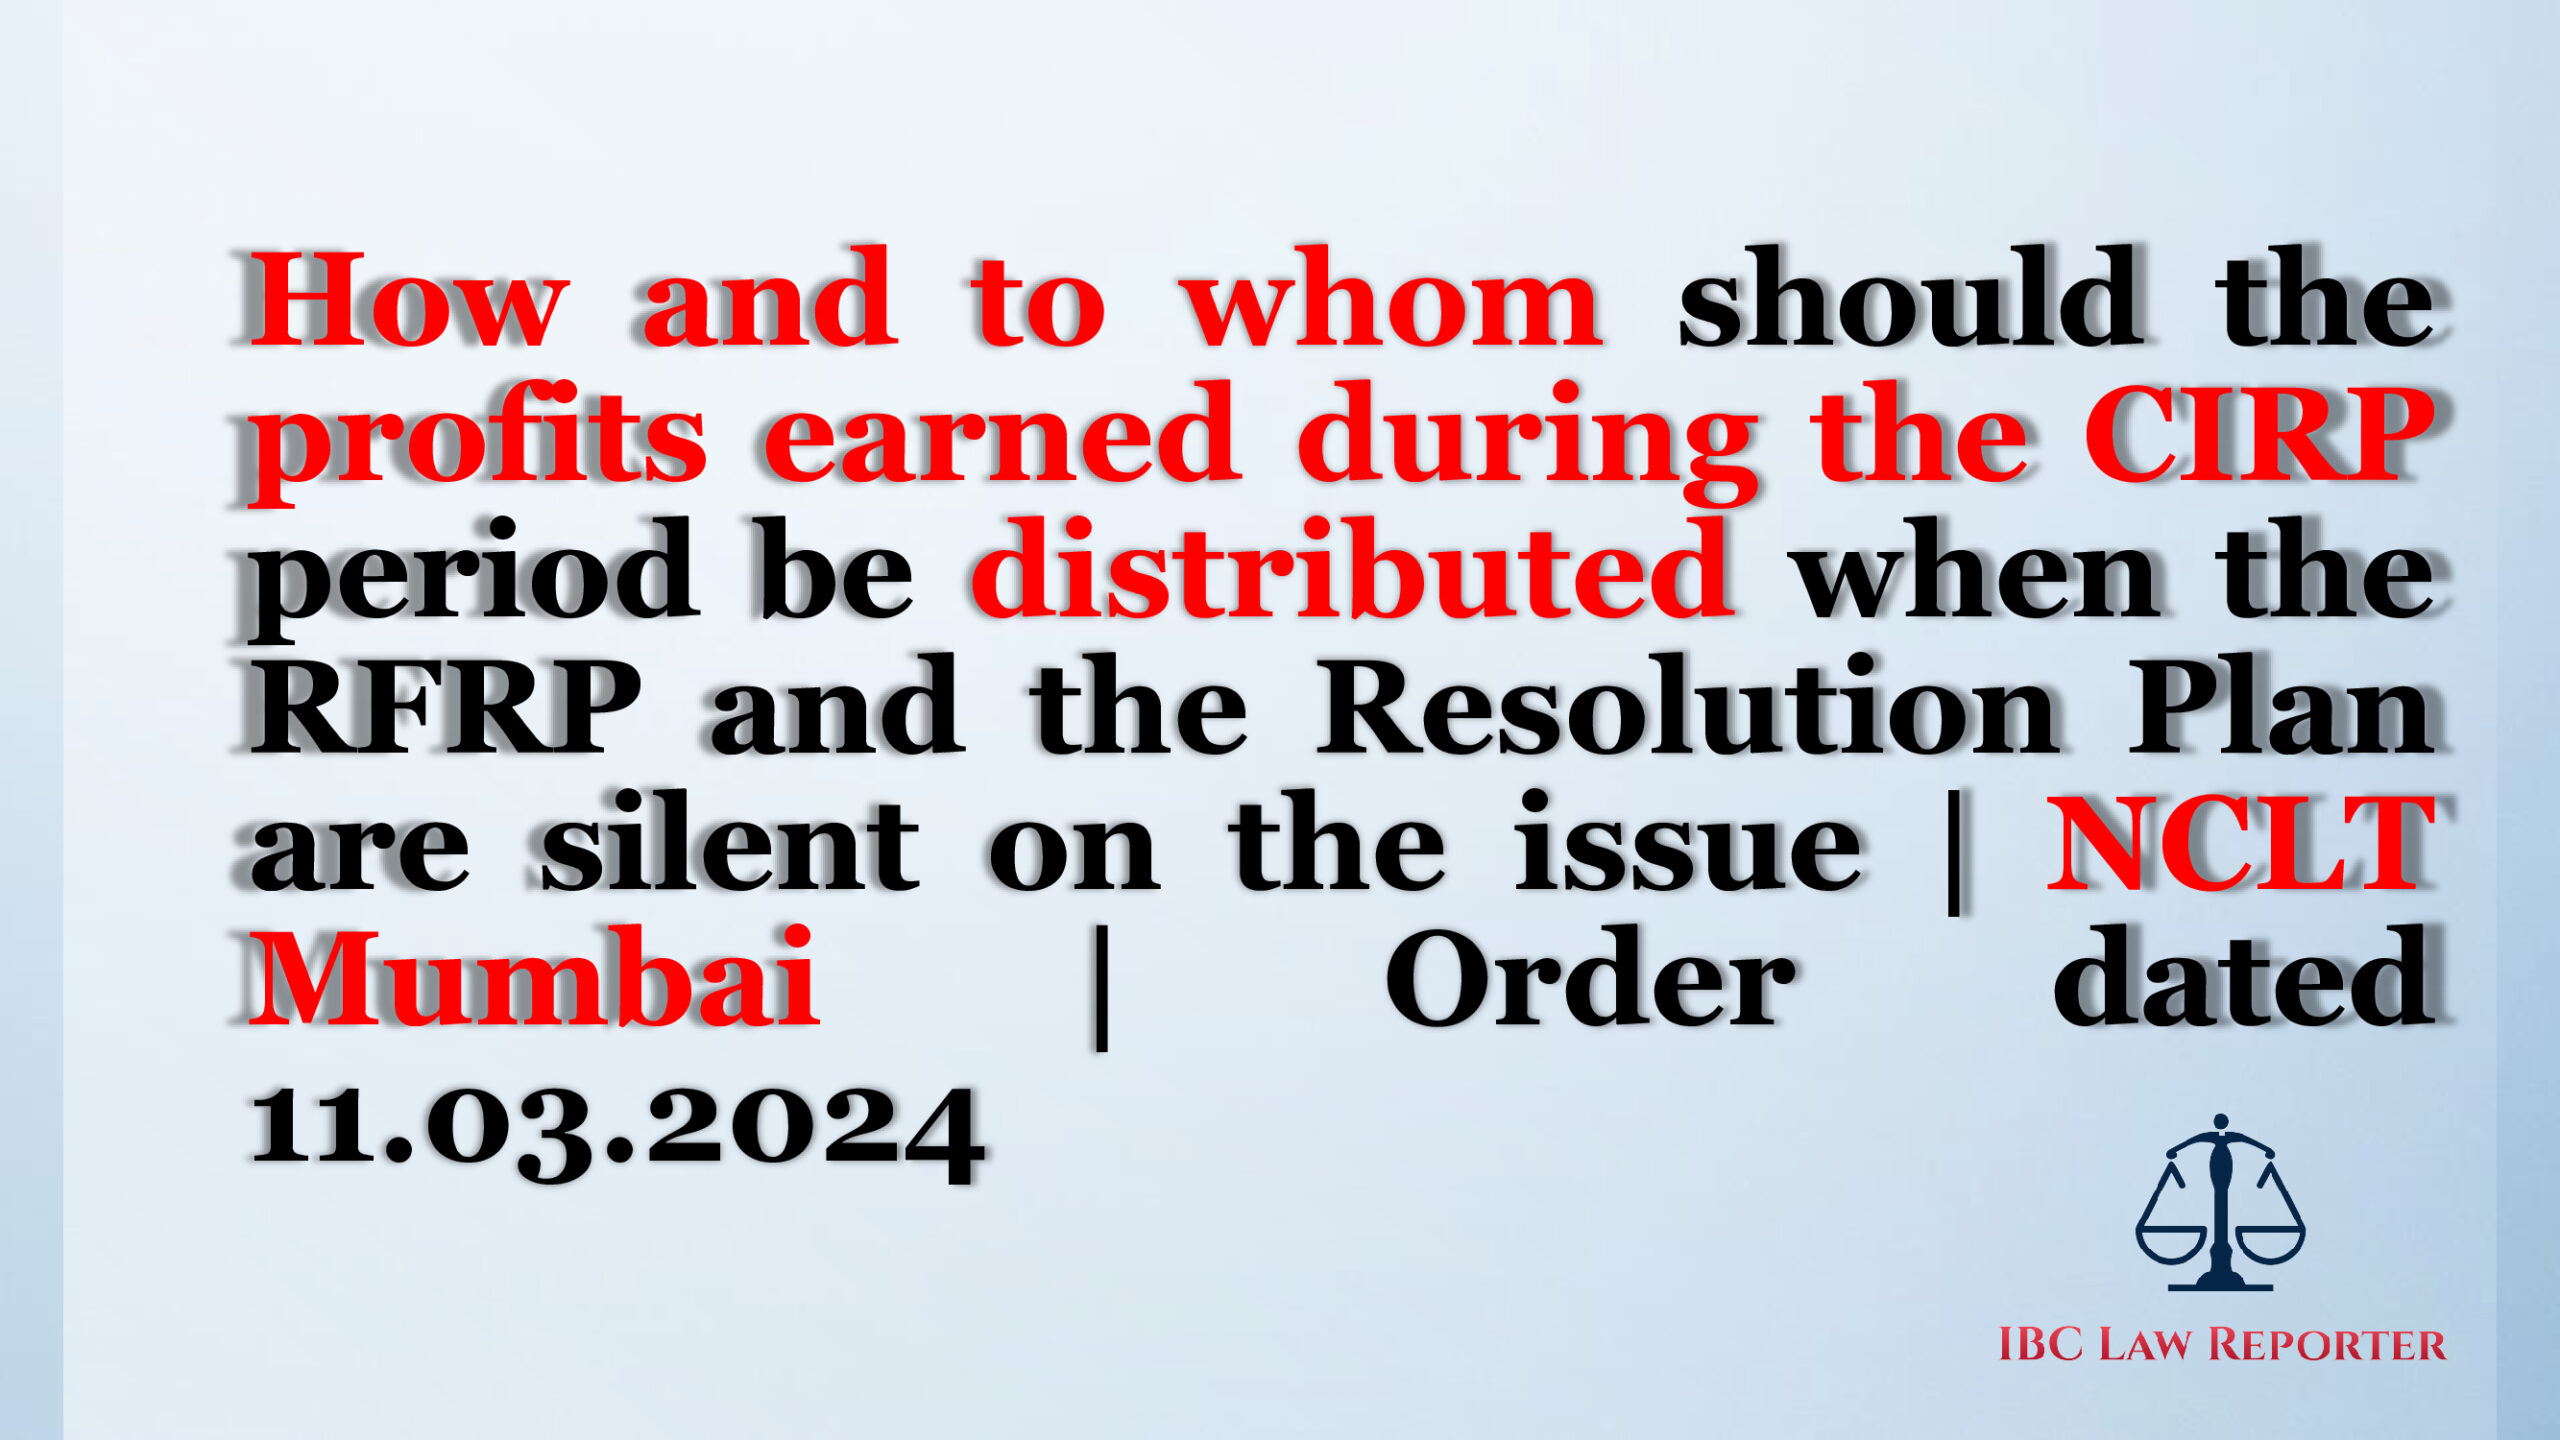 How and to whom should the profits earned during the CIRP period be distributed when the RFRP and the Resolution Plan are silent on the issue | NCLT Mumbai | Order dated 11.03.2024